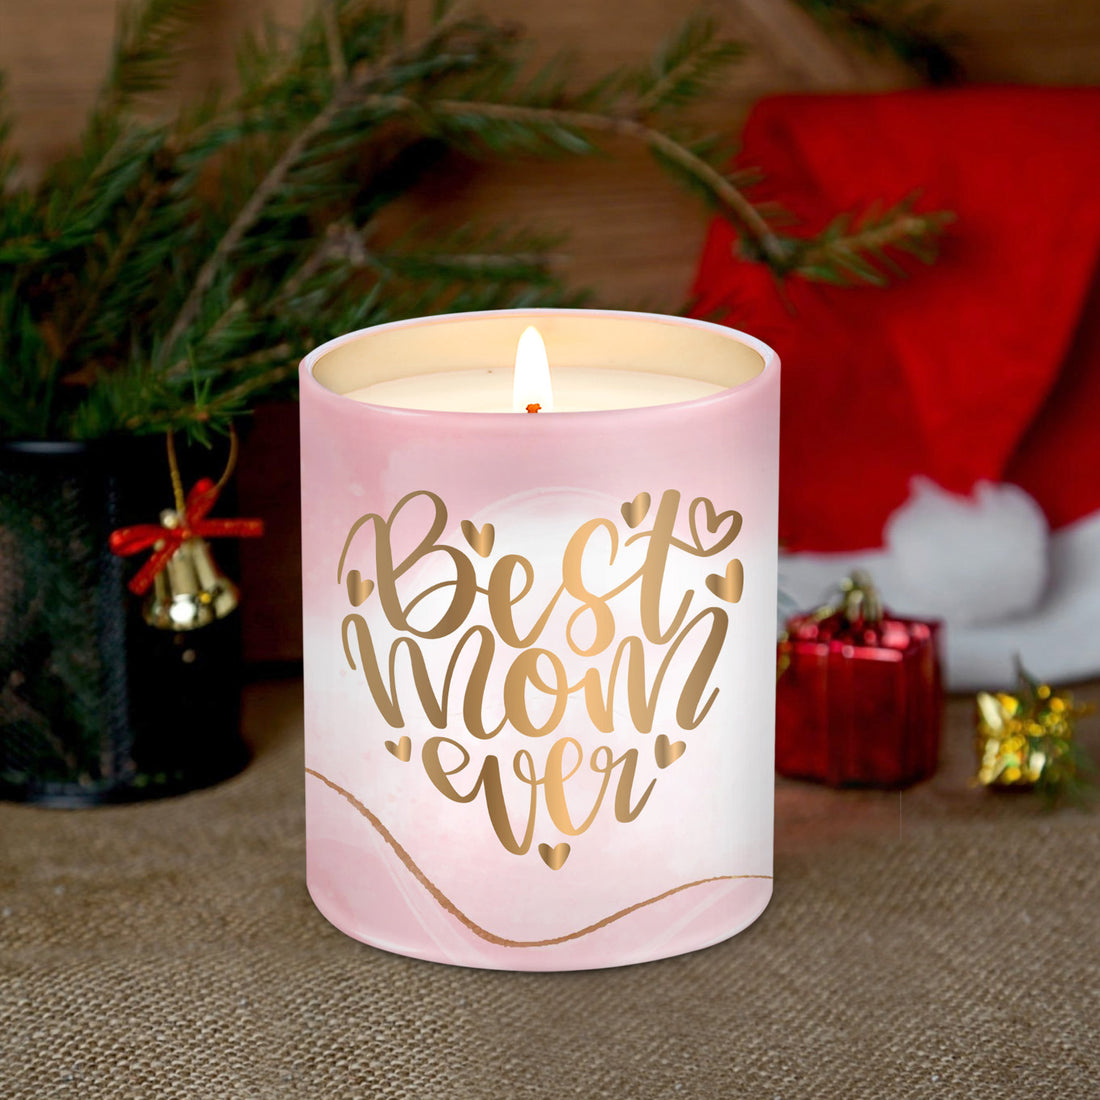 MOM'S LAST NERVE – COUNTRY CHARM CANDLES BOUTIQUE